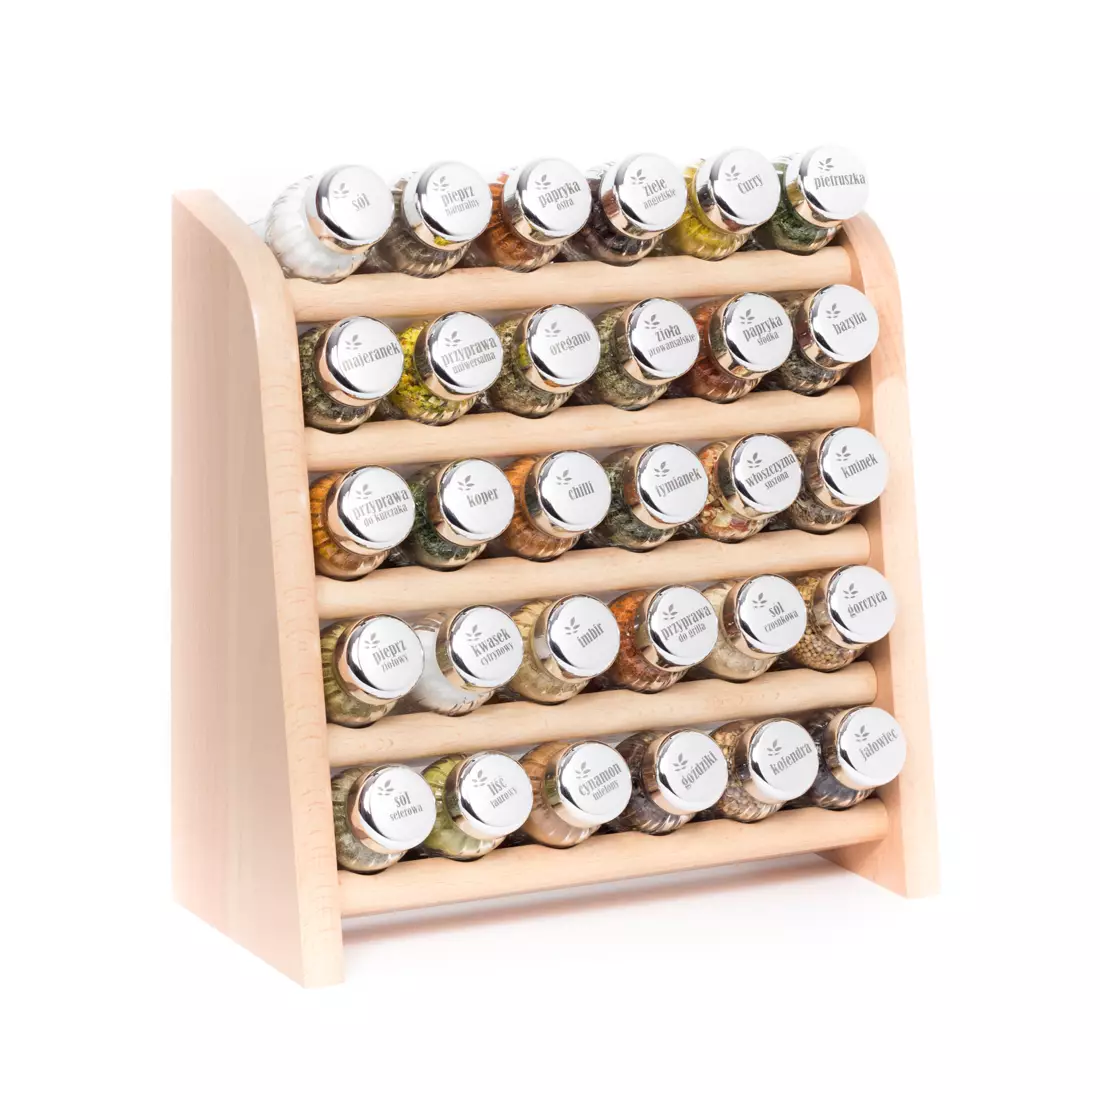 GALD 30NS spice rack, natural shine